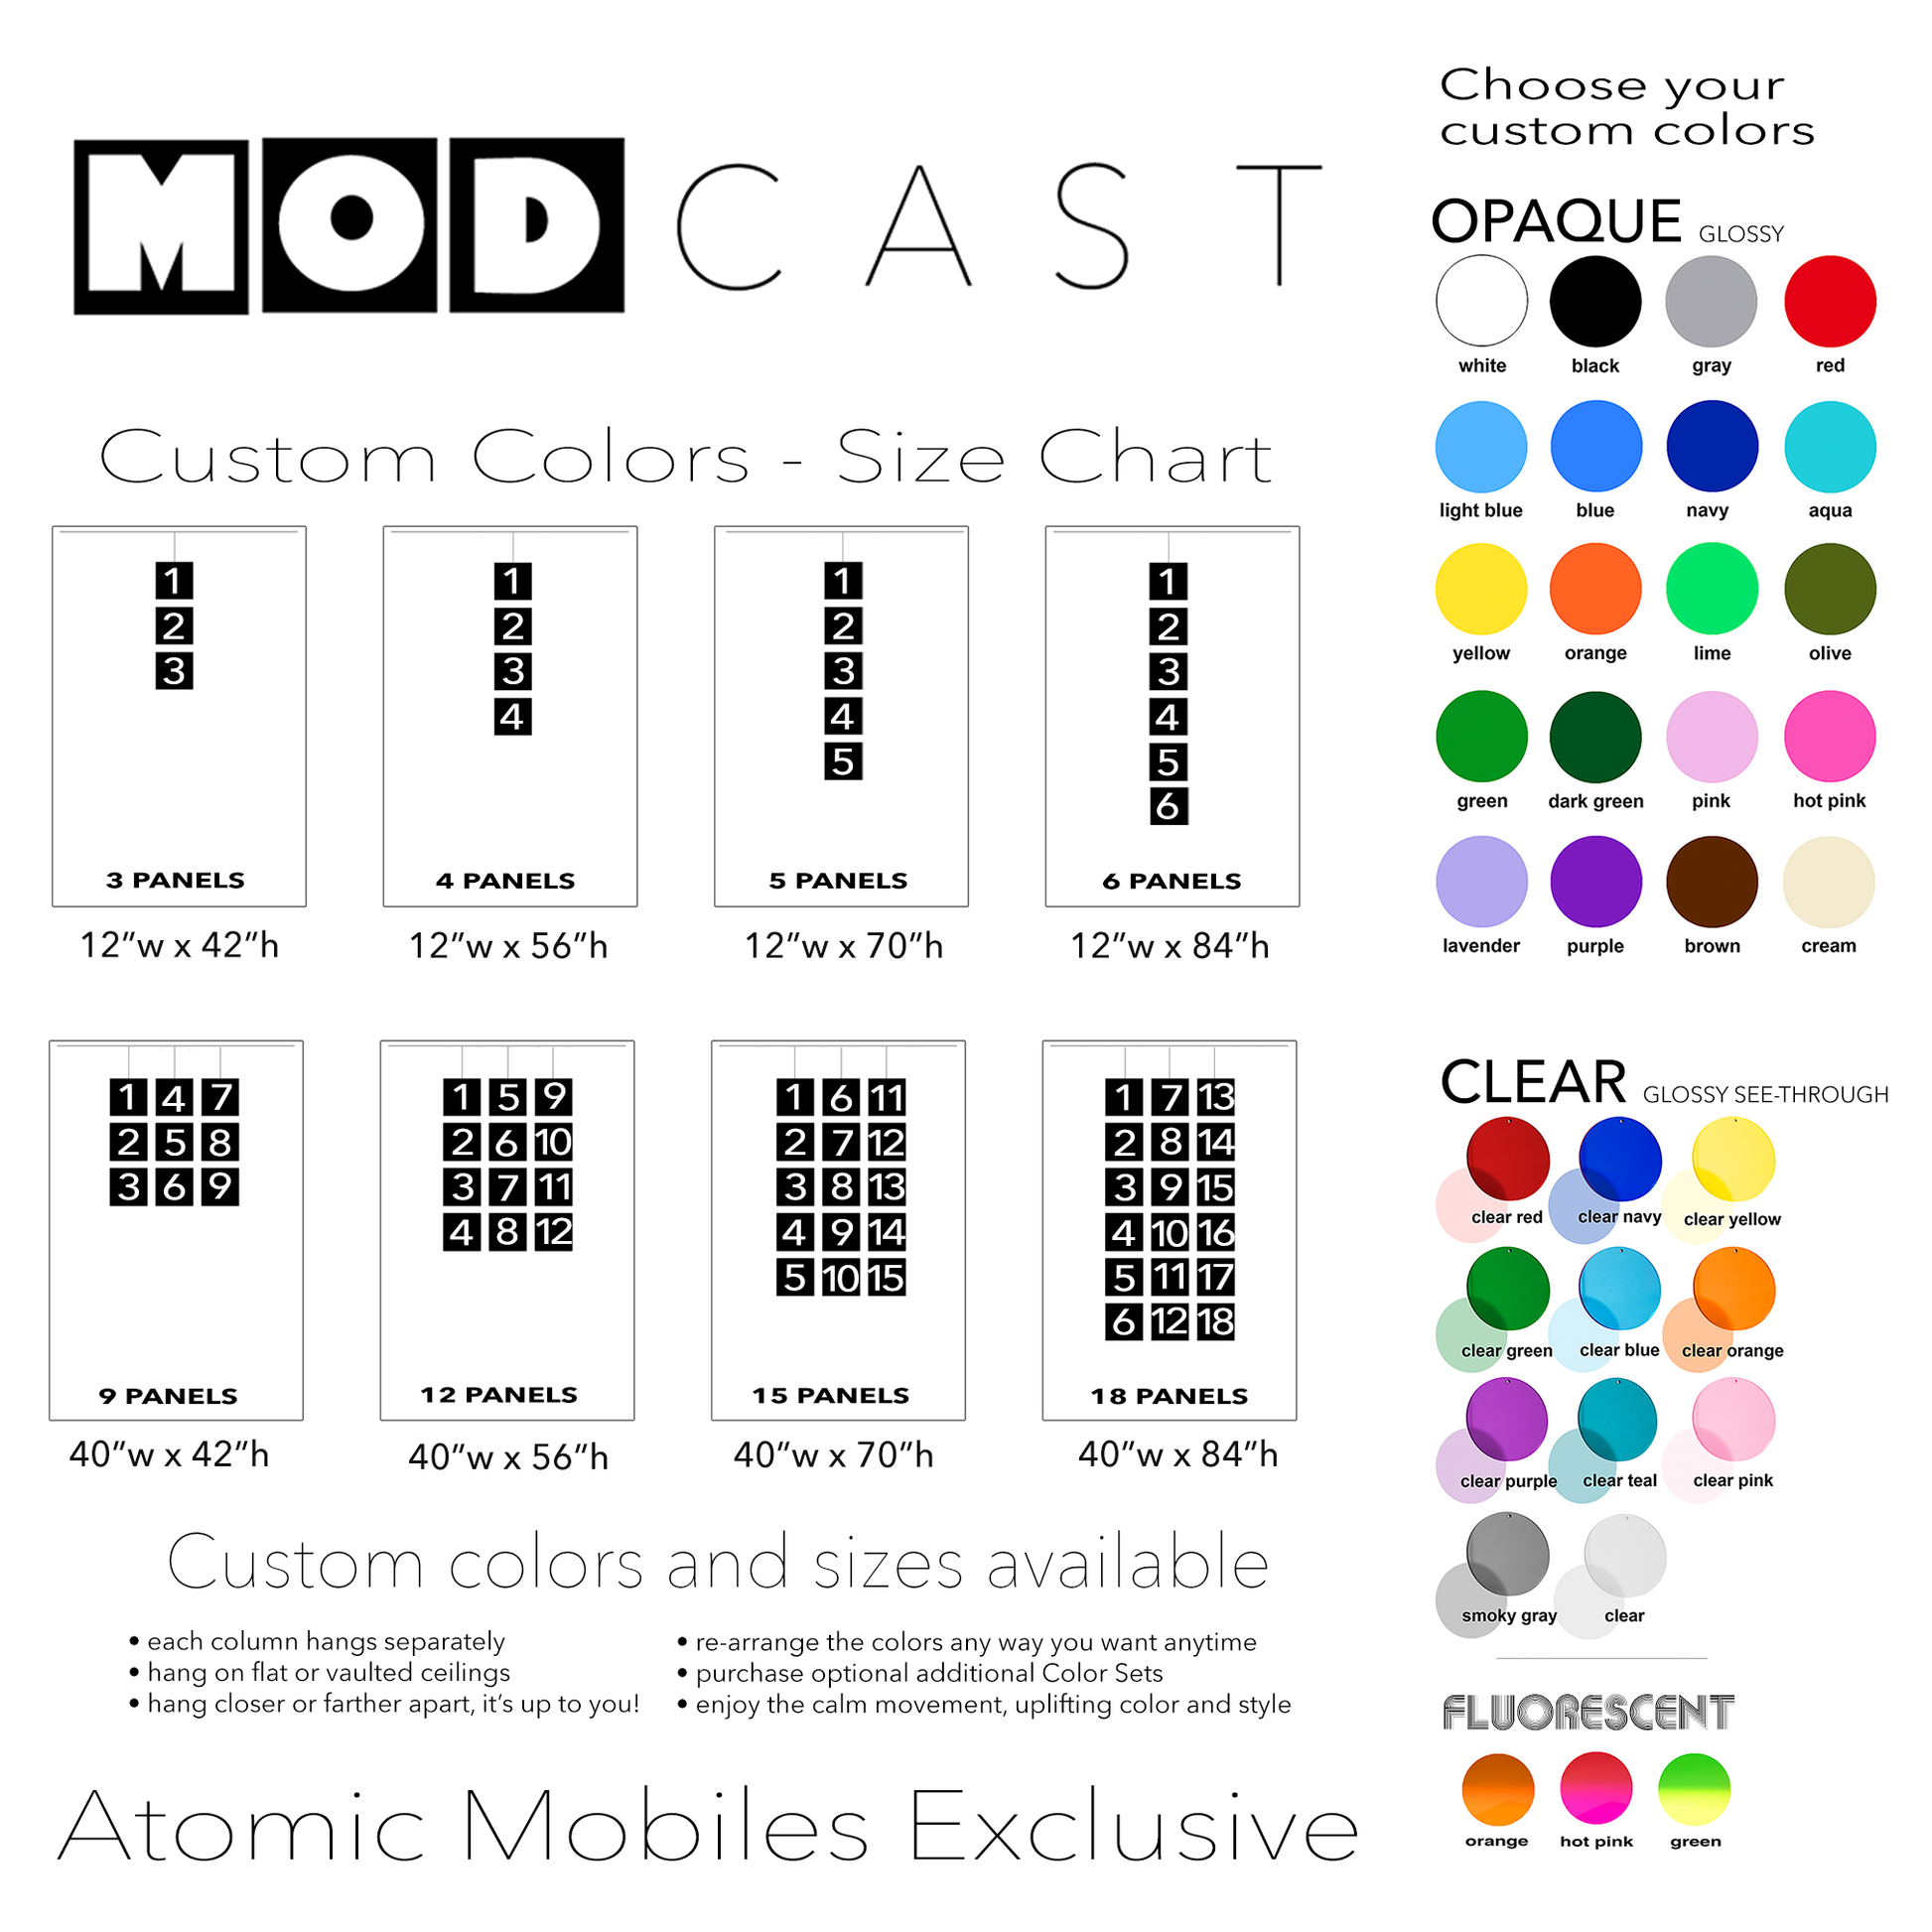 MODcast Color Chart - luxury architectural mobiles for outdoors and indoors in 34 beautiful colors and custom sizes - by AtomicMobiles.com